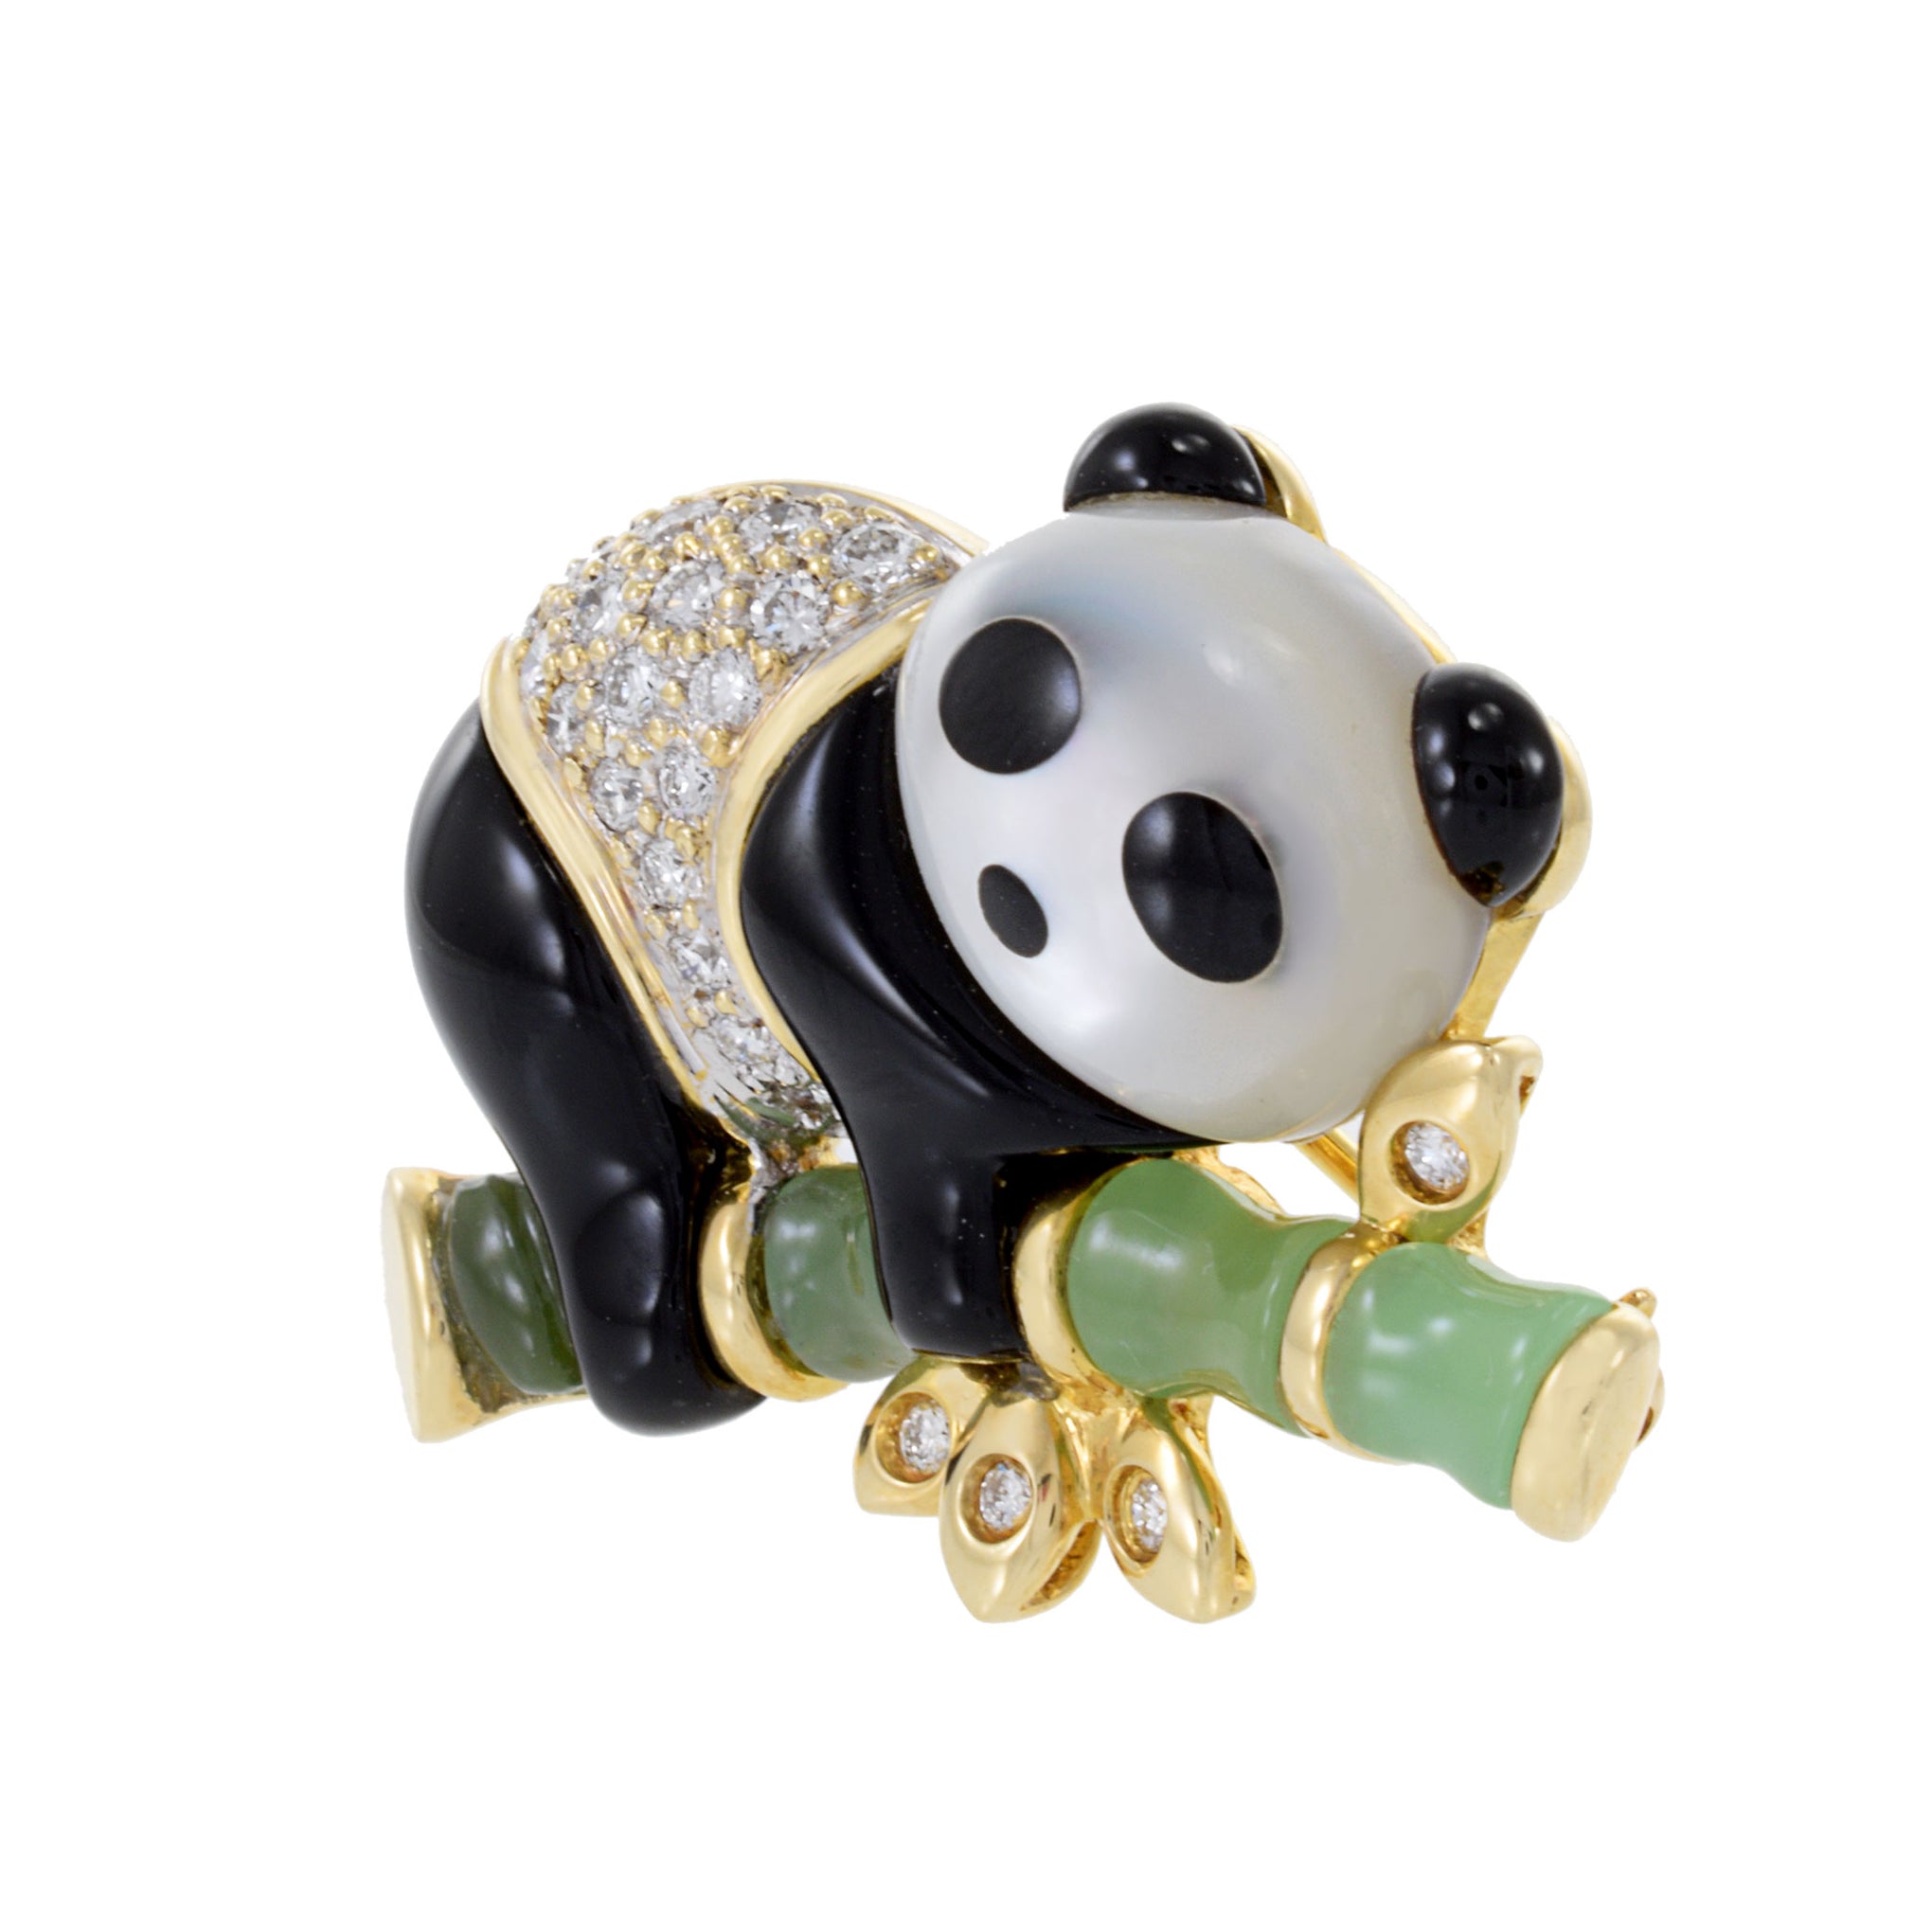 Vintage 14KT Yellow Gold Mother Of Pearl, Onyx And Jade Panda Brooch